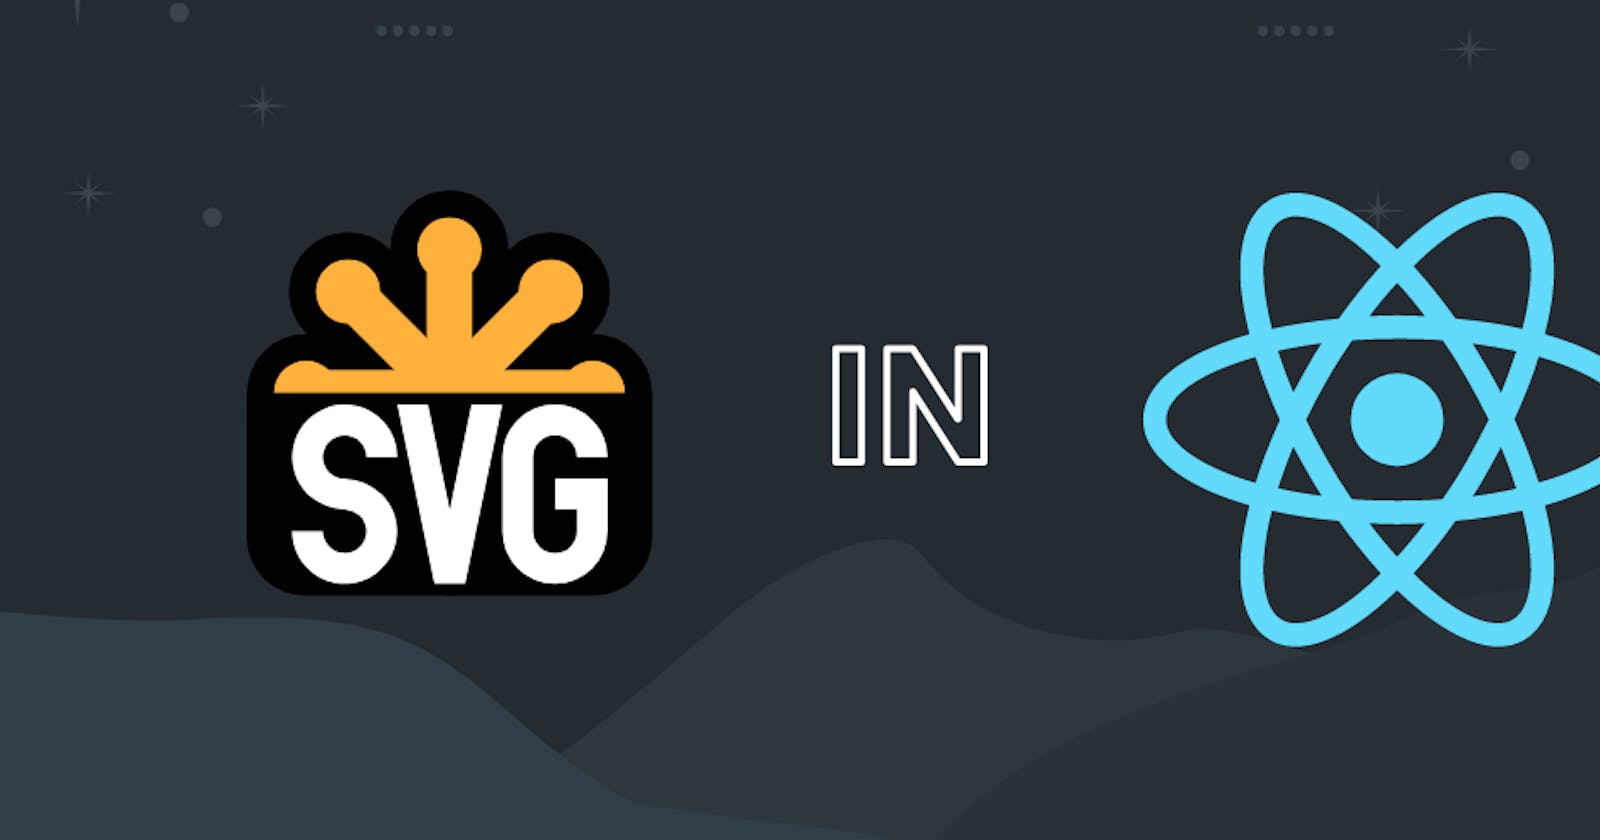 How to import SVG in React